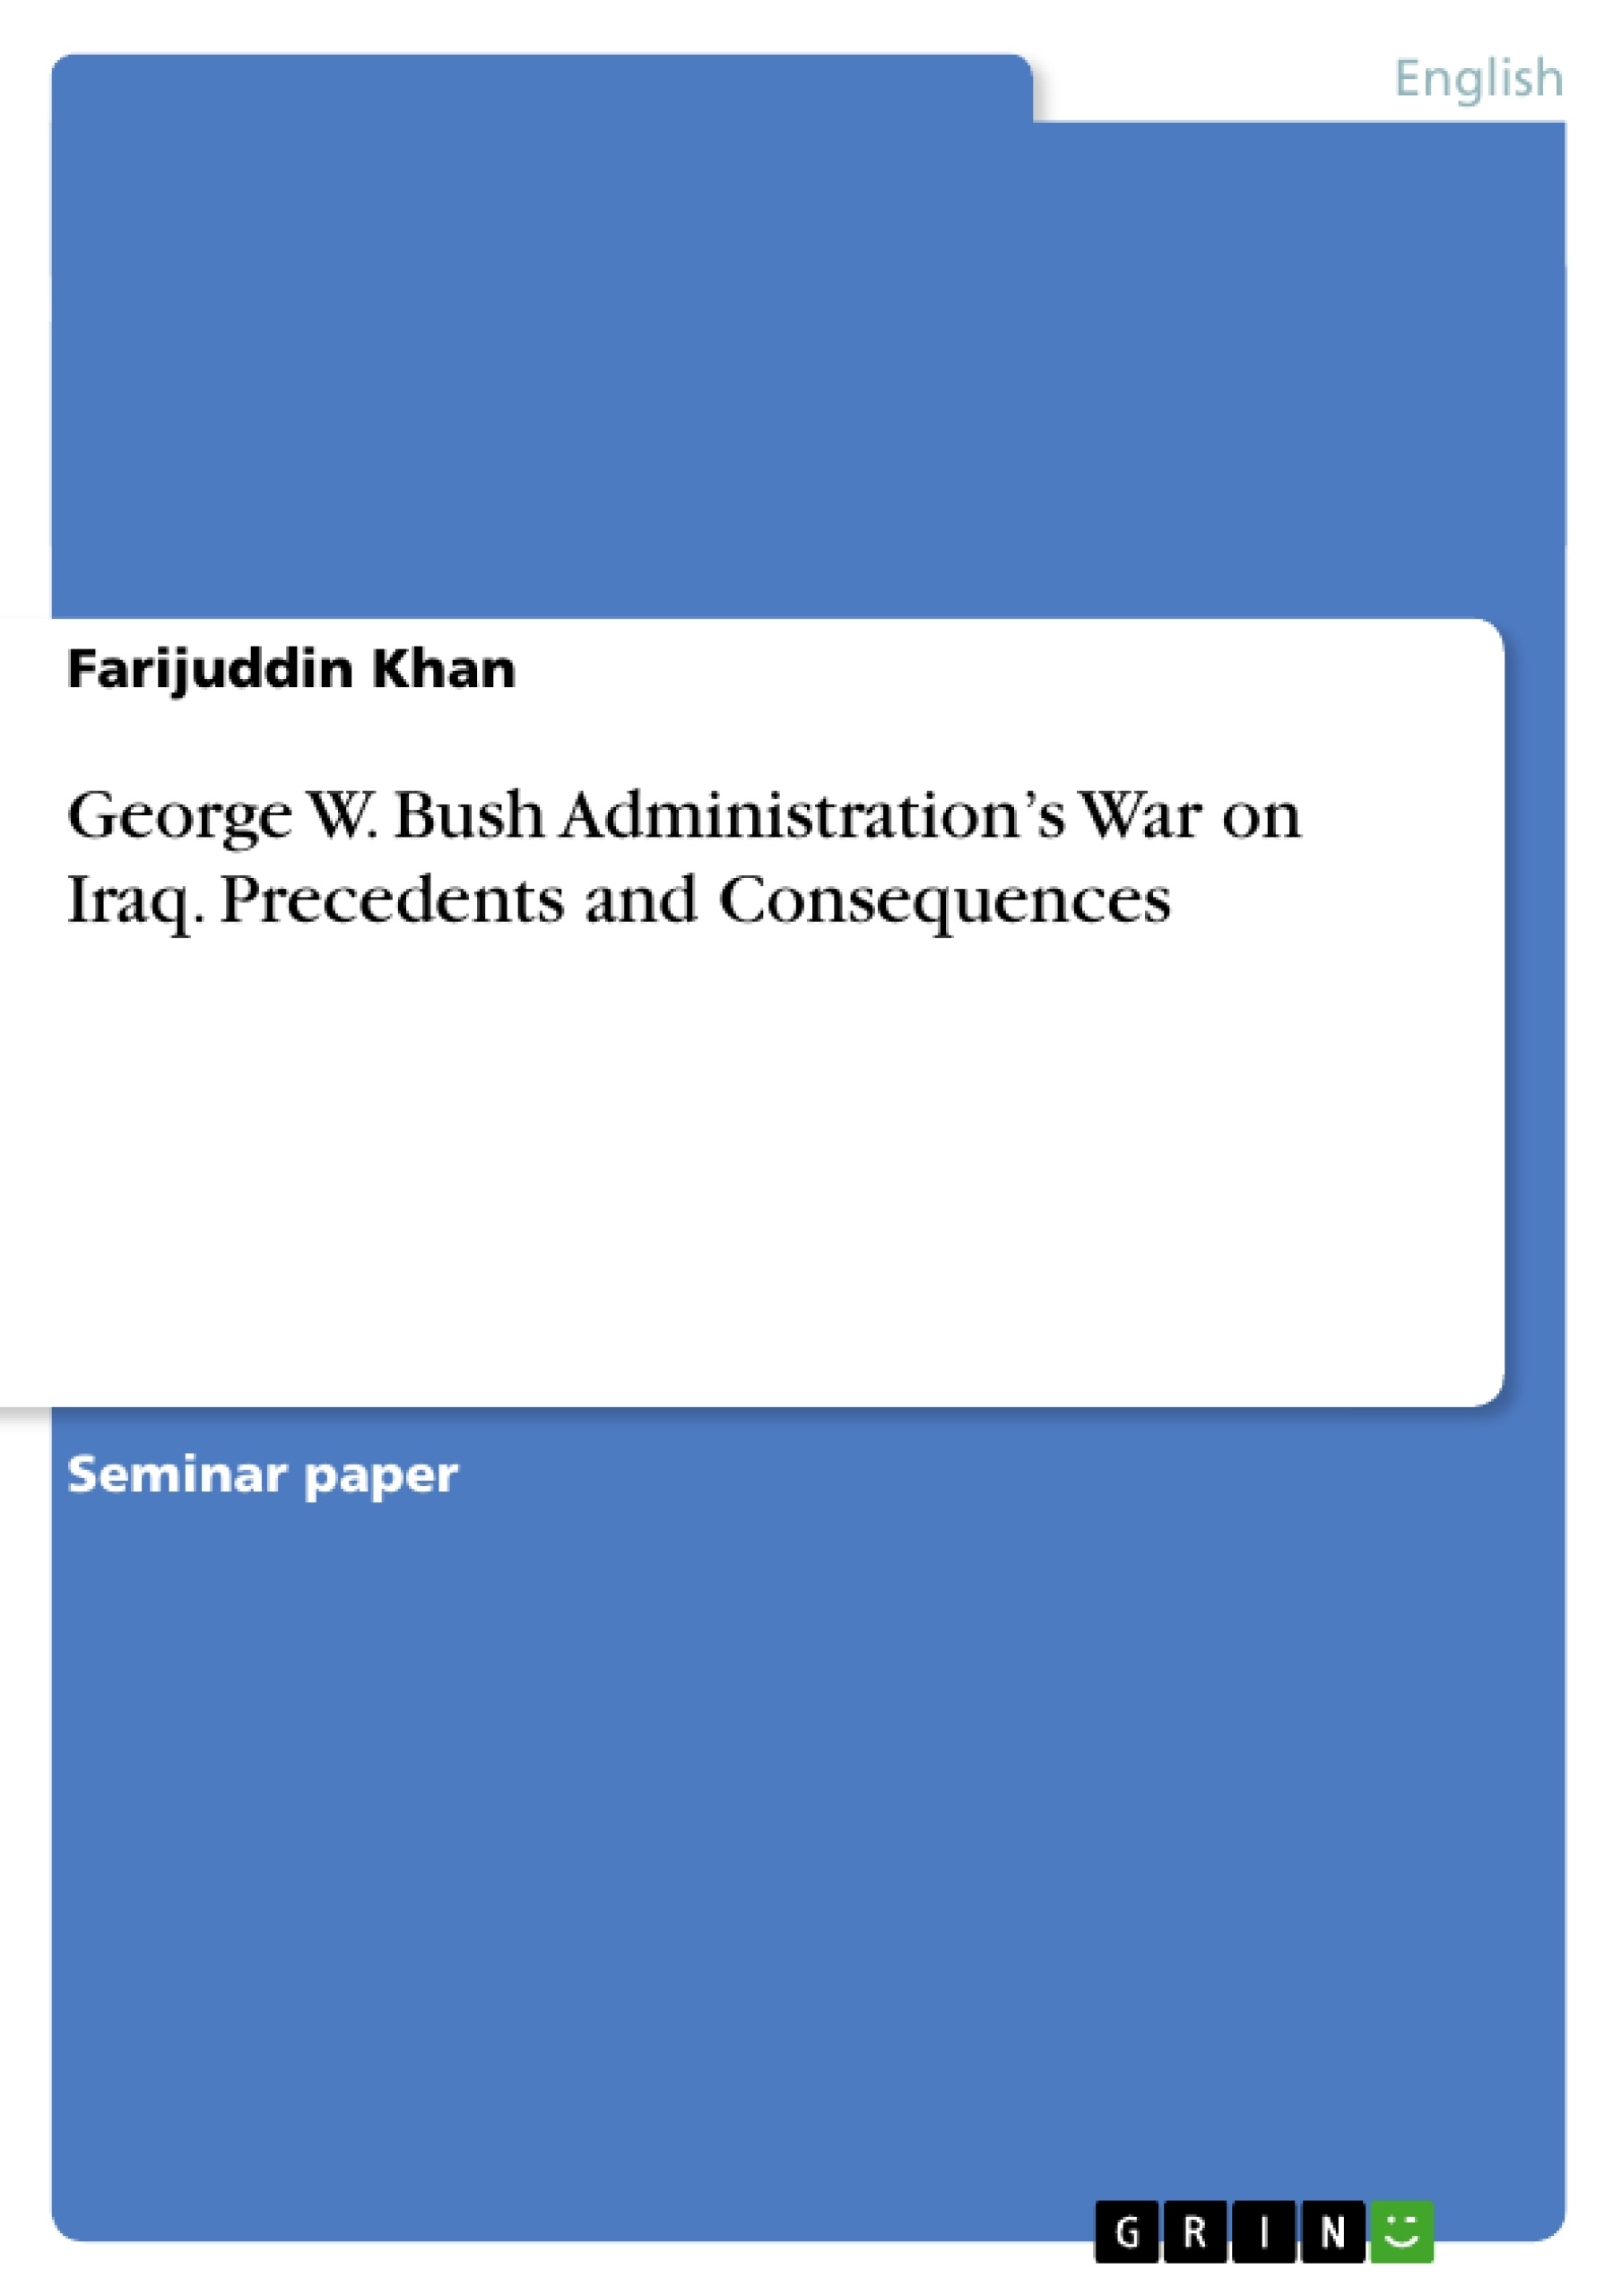 Title: George W. Bush Administration’s War on Iraq. Precedents and Consequences